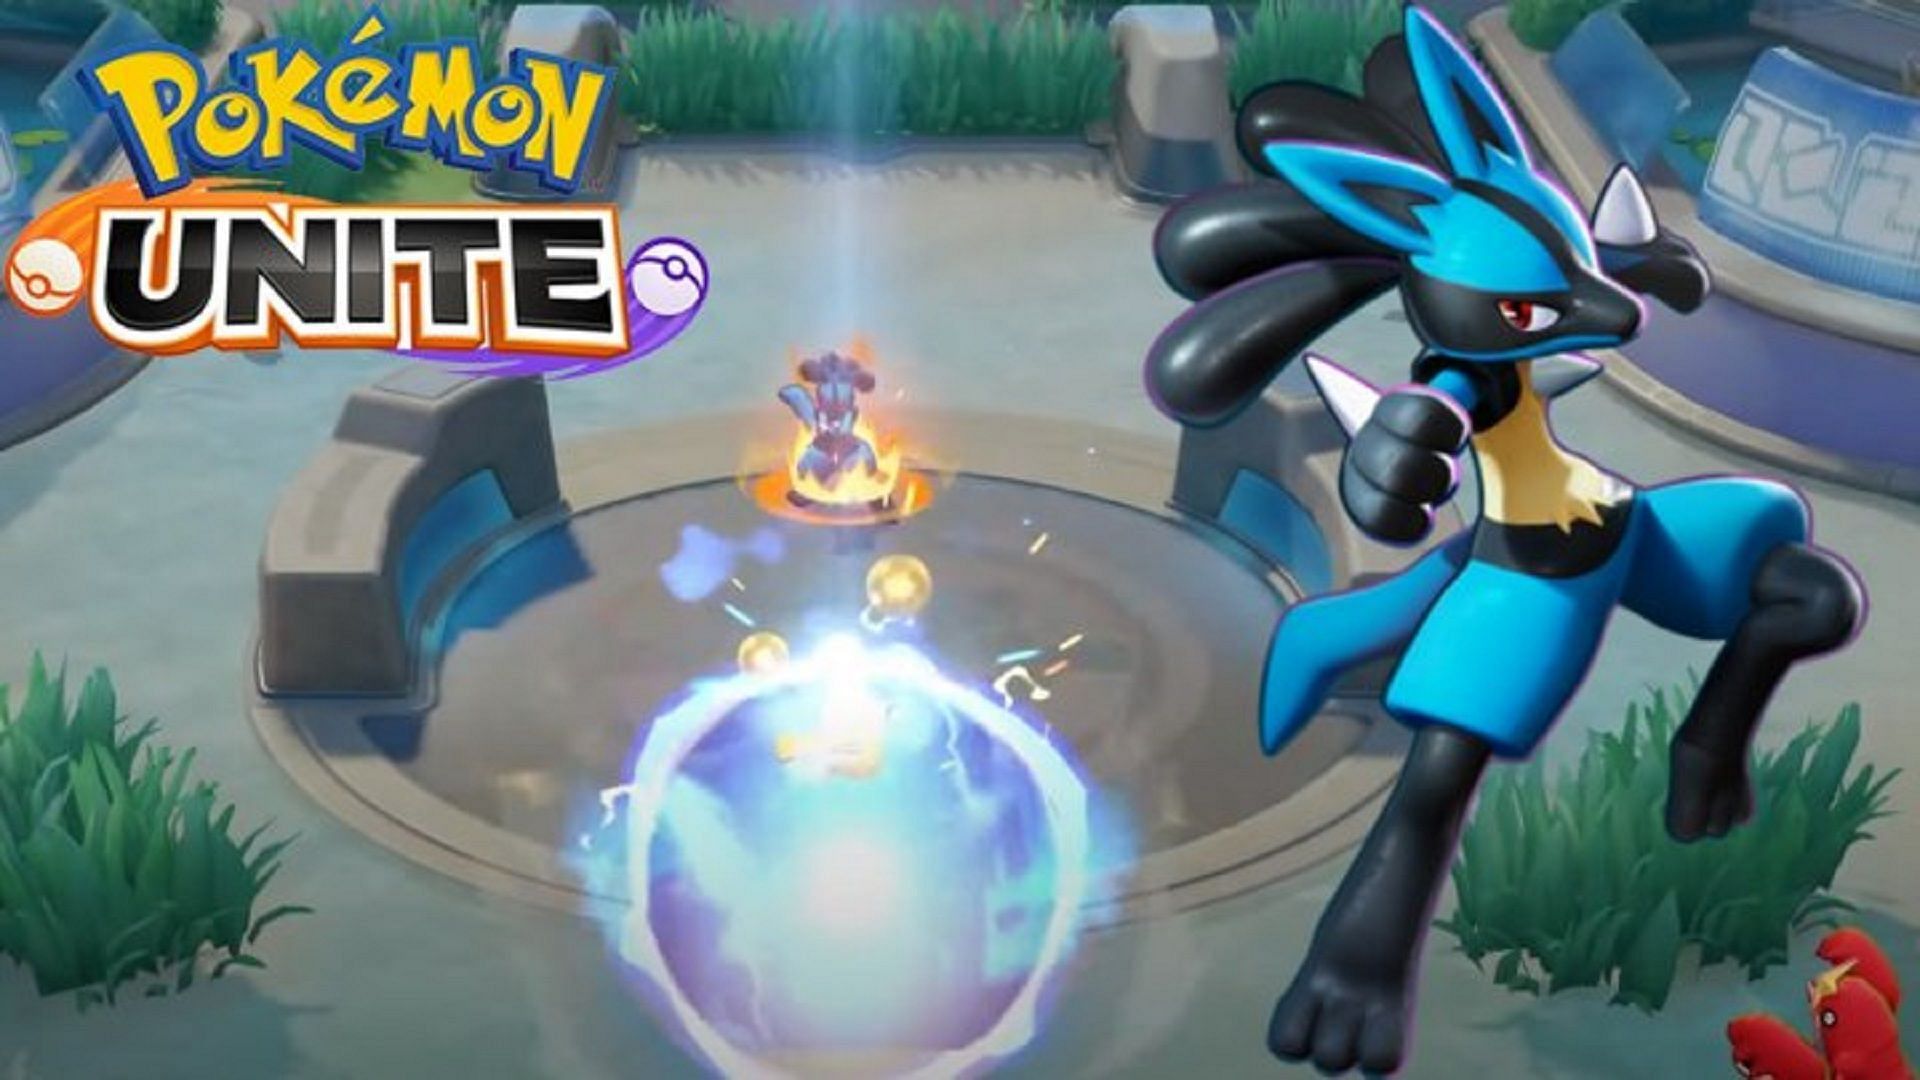 Lucario arrived in Pokemon Unite during the initial game launch (Image via The Pokemon Company)